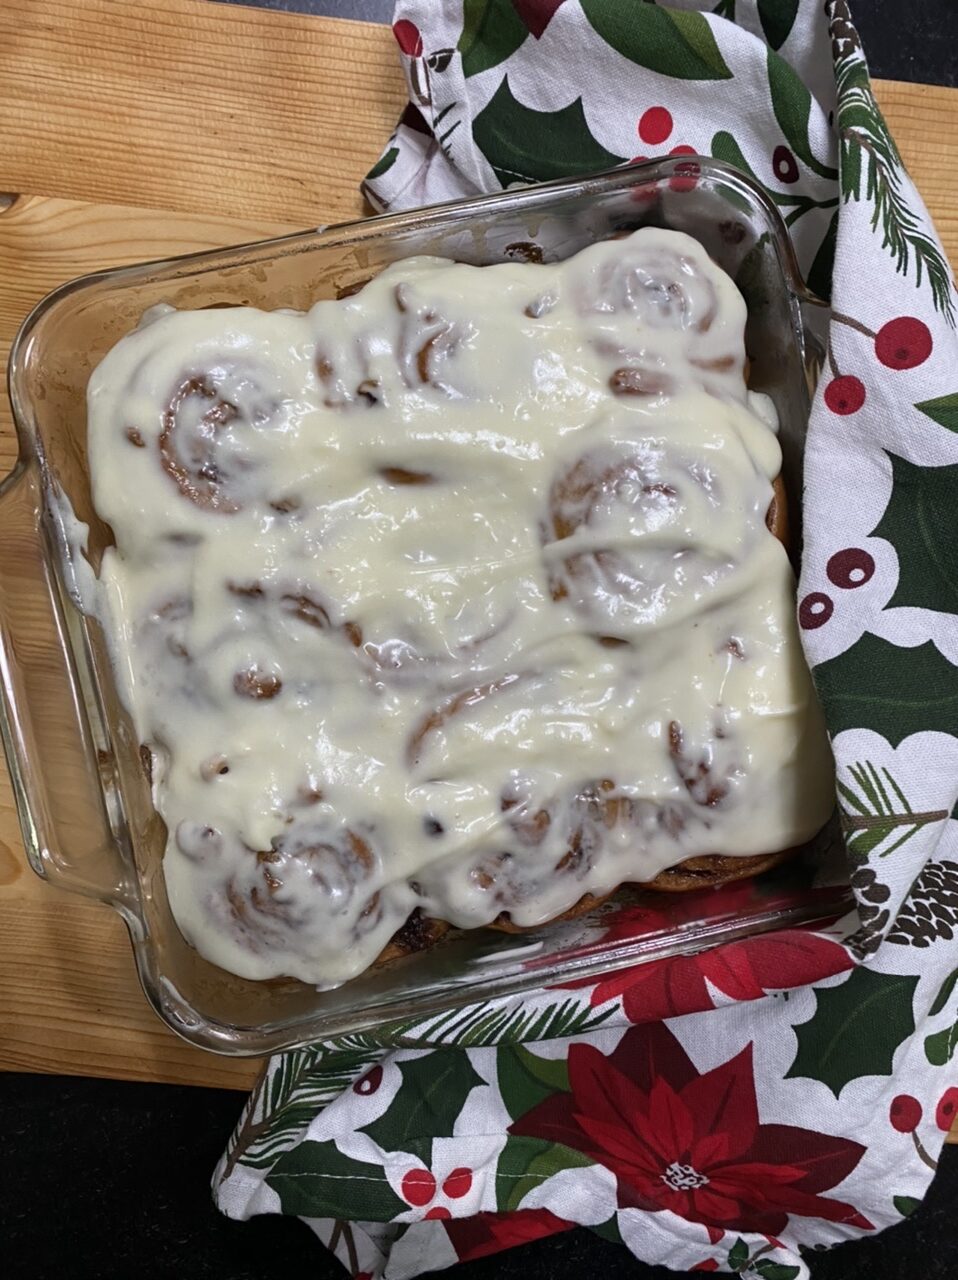 Cinnamon rolls with frosting on top of a wood cutting board and Christmas towel